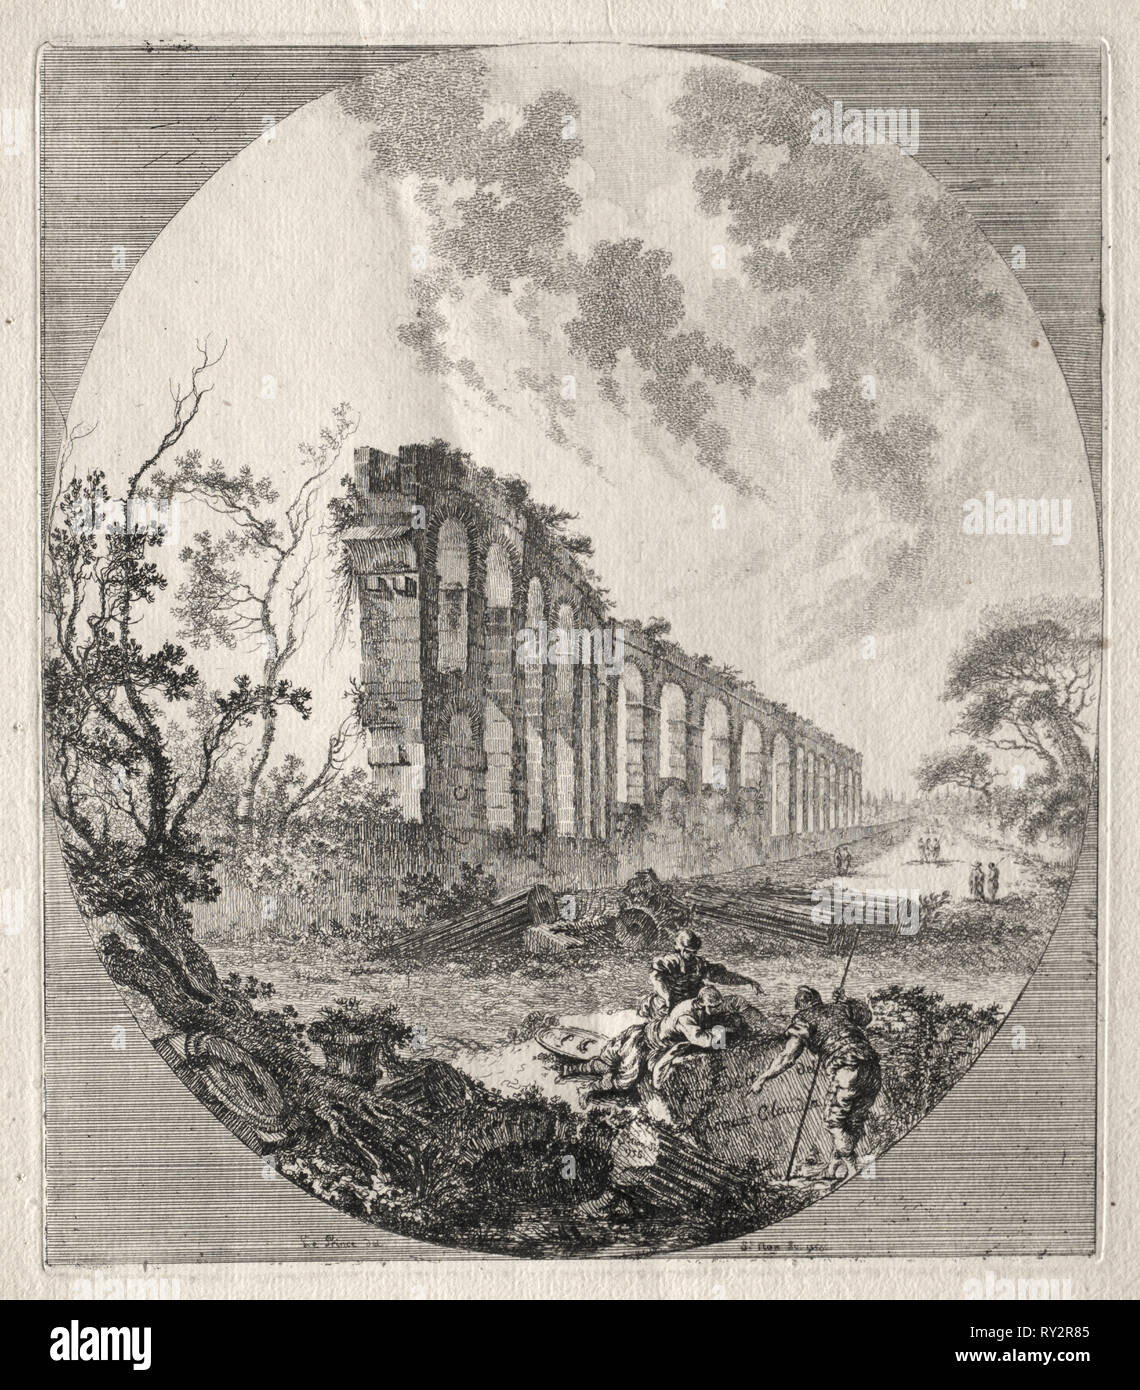 Ancient Ruins: Ancient Aqueduct, 1756. Jean-Claude-Richard de Saint-Non  (French, 1727-1791), after Jean Baptiste Le Prince (French, 1734-1781).  Etching; platemark: 27.2 x 23.7 cm (10 11/16 x 9 5/16 in Stock Photo - Alamy